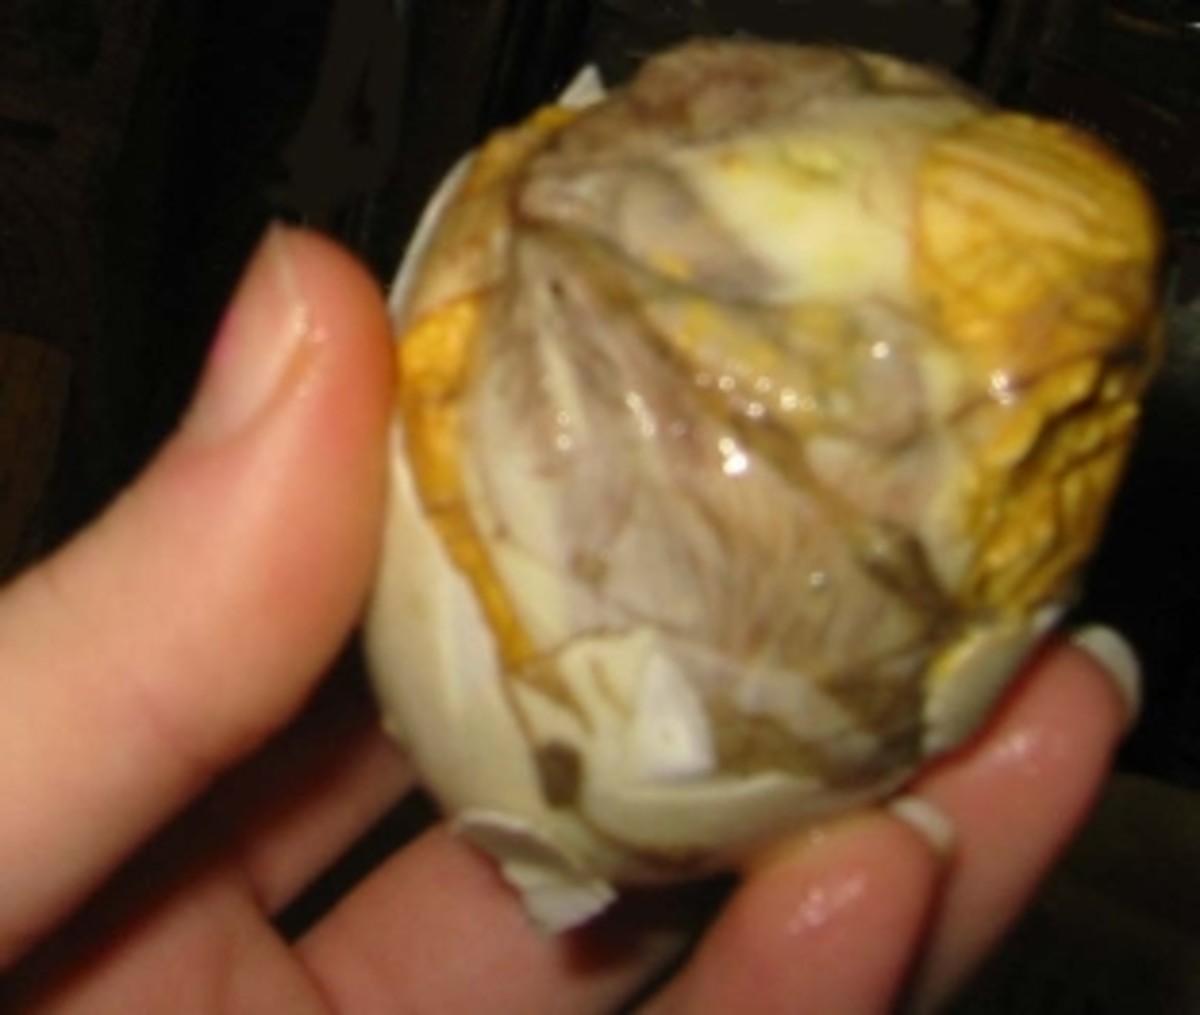 Balut or Fertilized duck eggs can be purchased in many Asian Countries.  It's a popular street food in the Philippines.